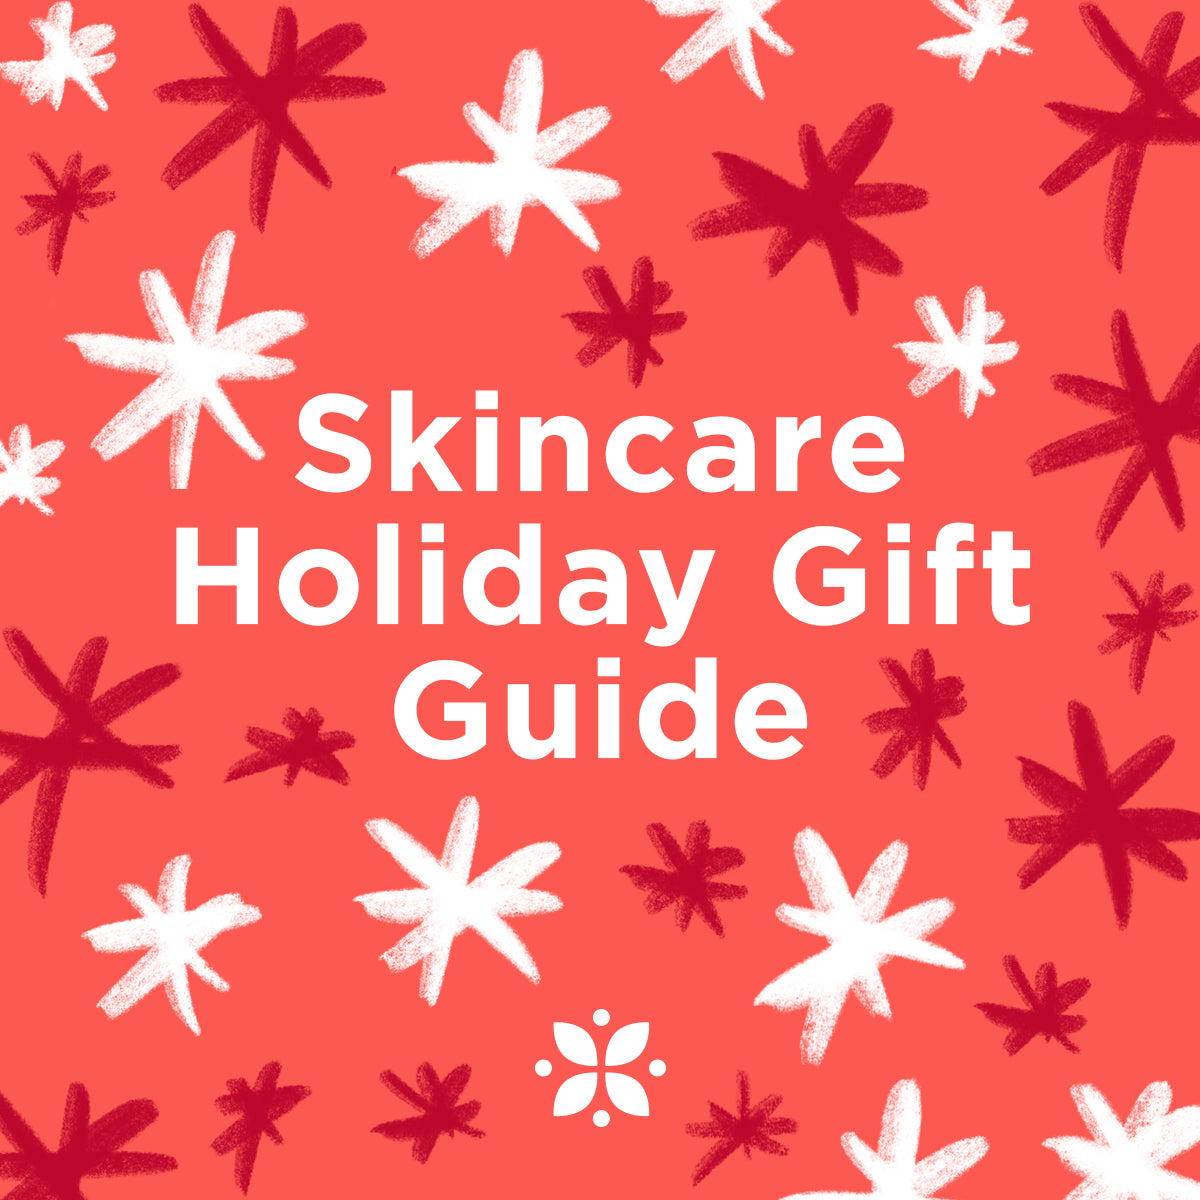 Holiday Gift Guide: Skincare Gifts They’ll Actually Love Under $30